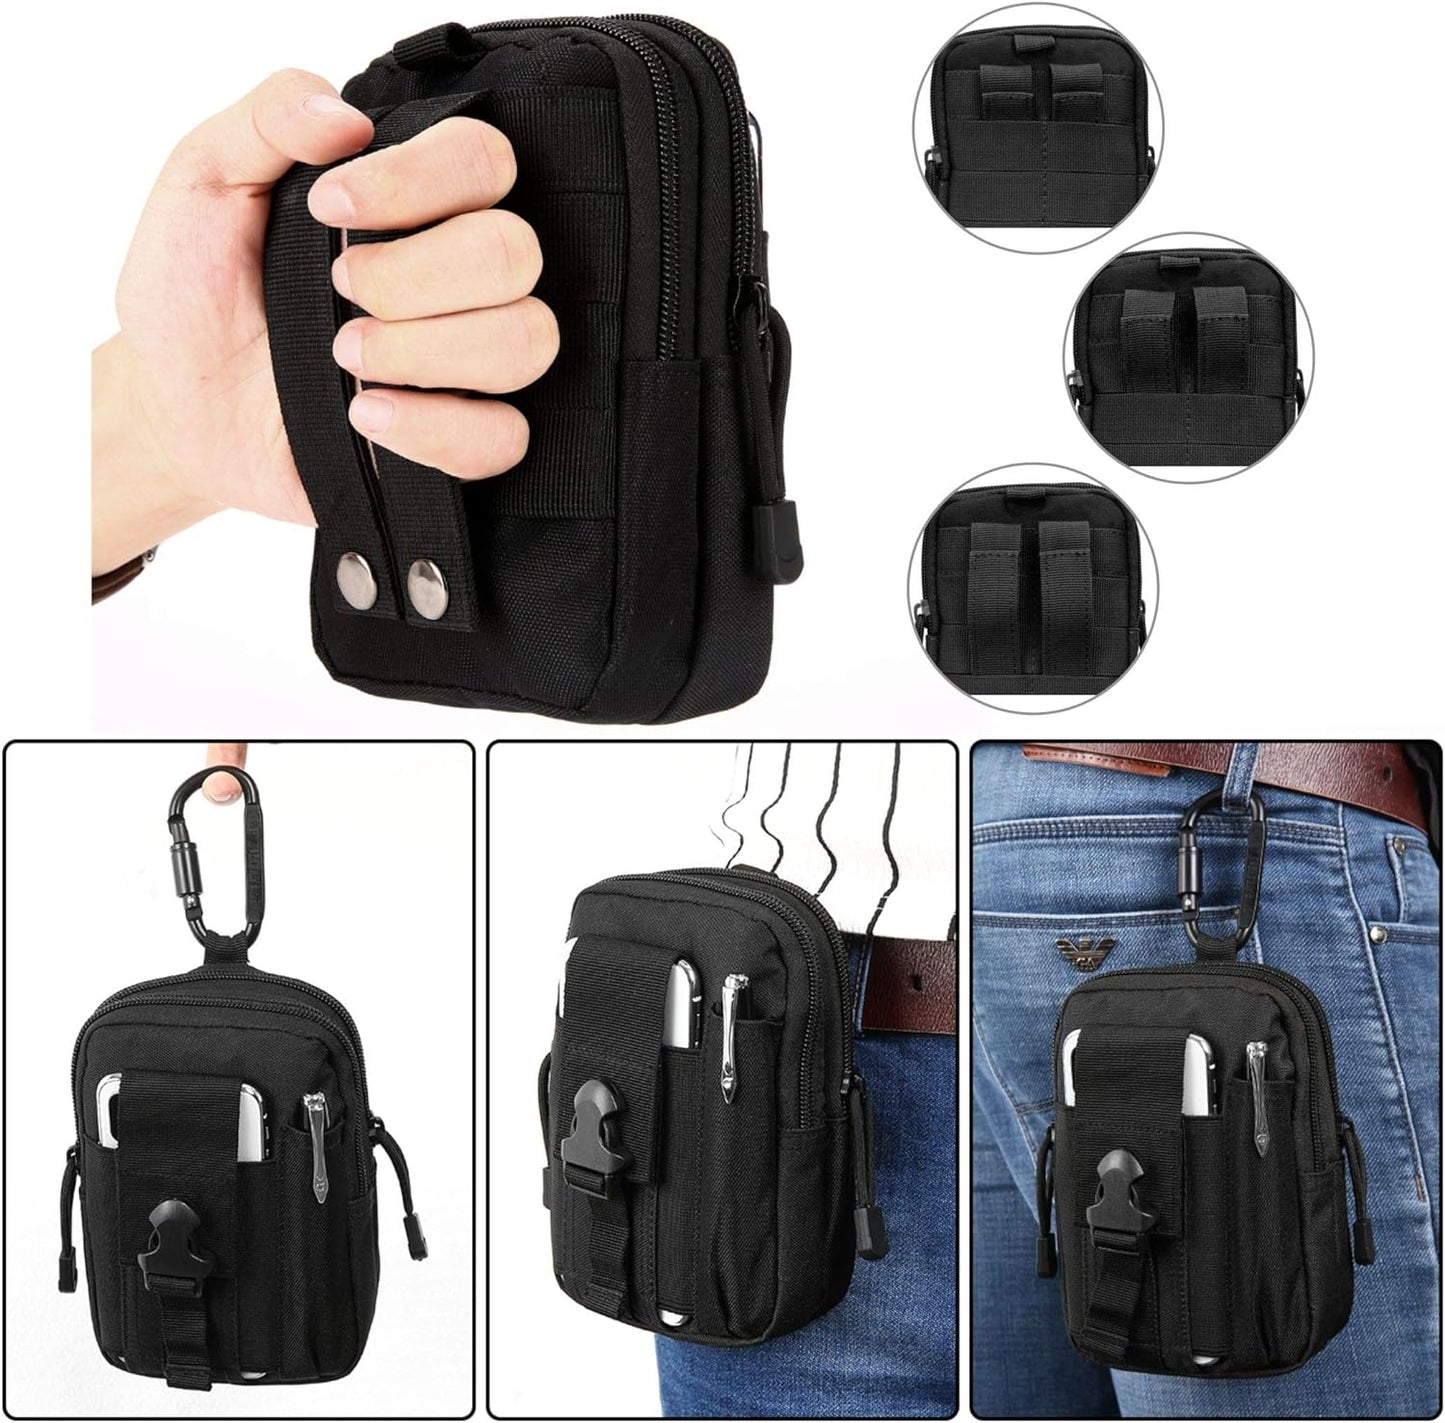 Tactical Waist Pouch EDC Molle Waist Bag Belt Phone Pouch Holster Purse Carrying Pouch for Smartphone, Tools